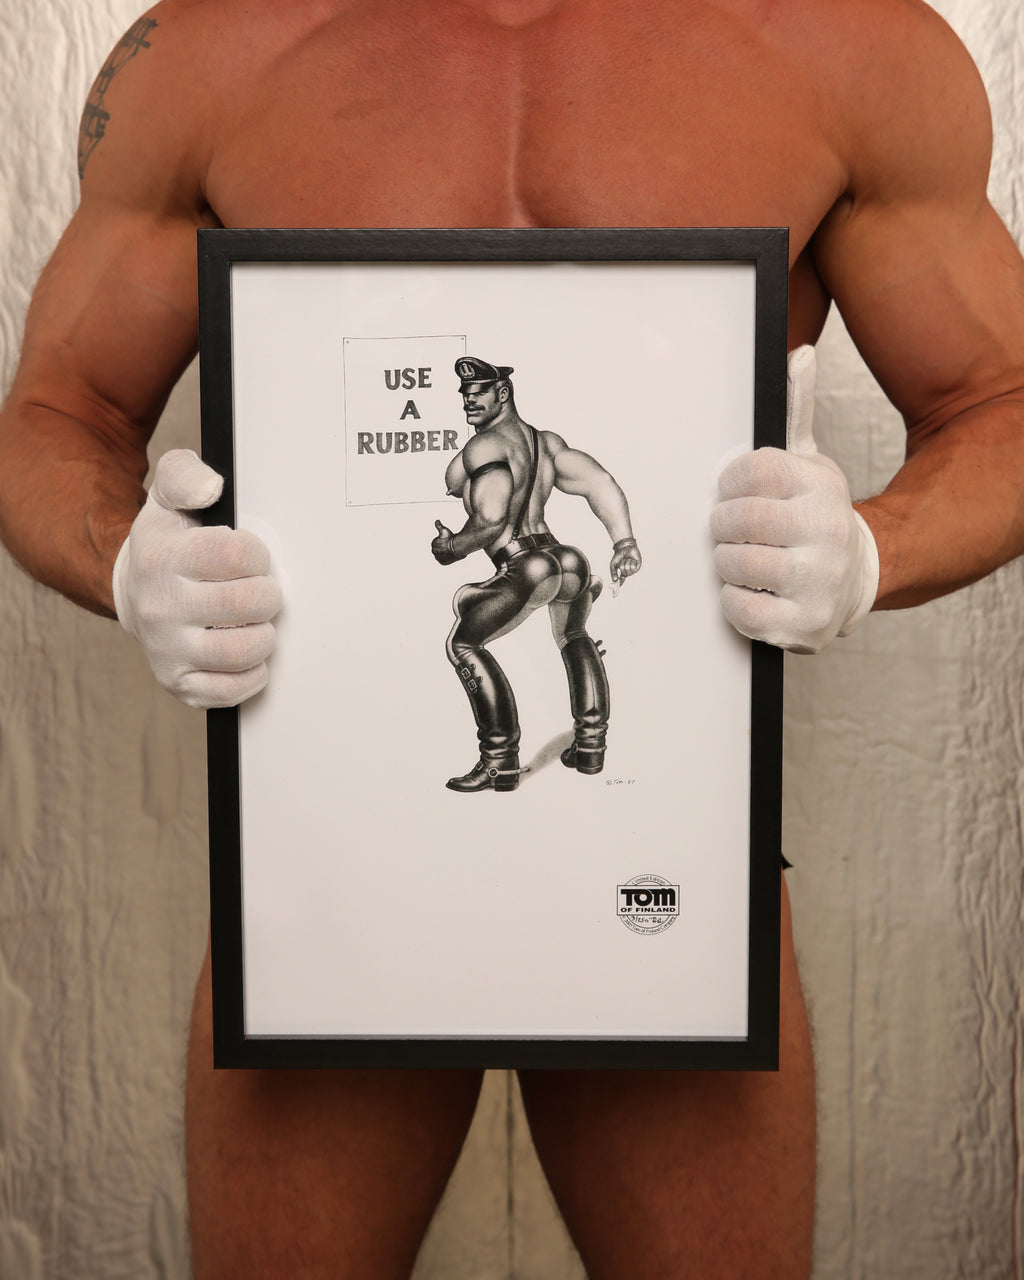 Tom of Finland Use A Rubber, 1987